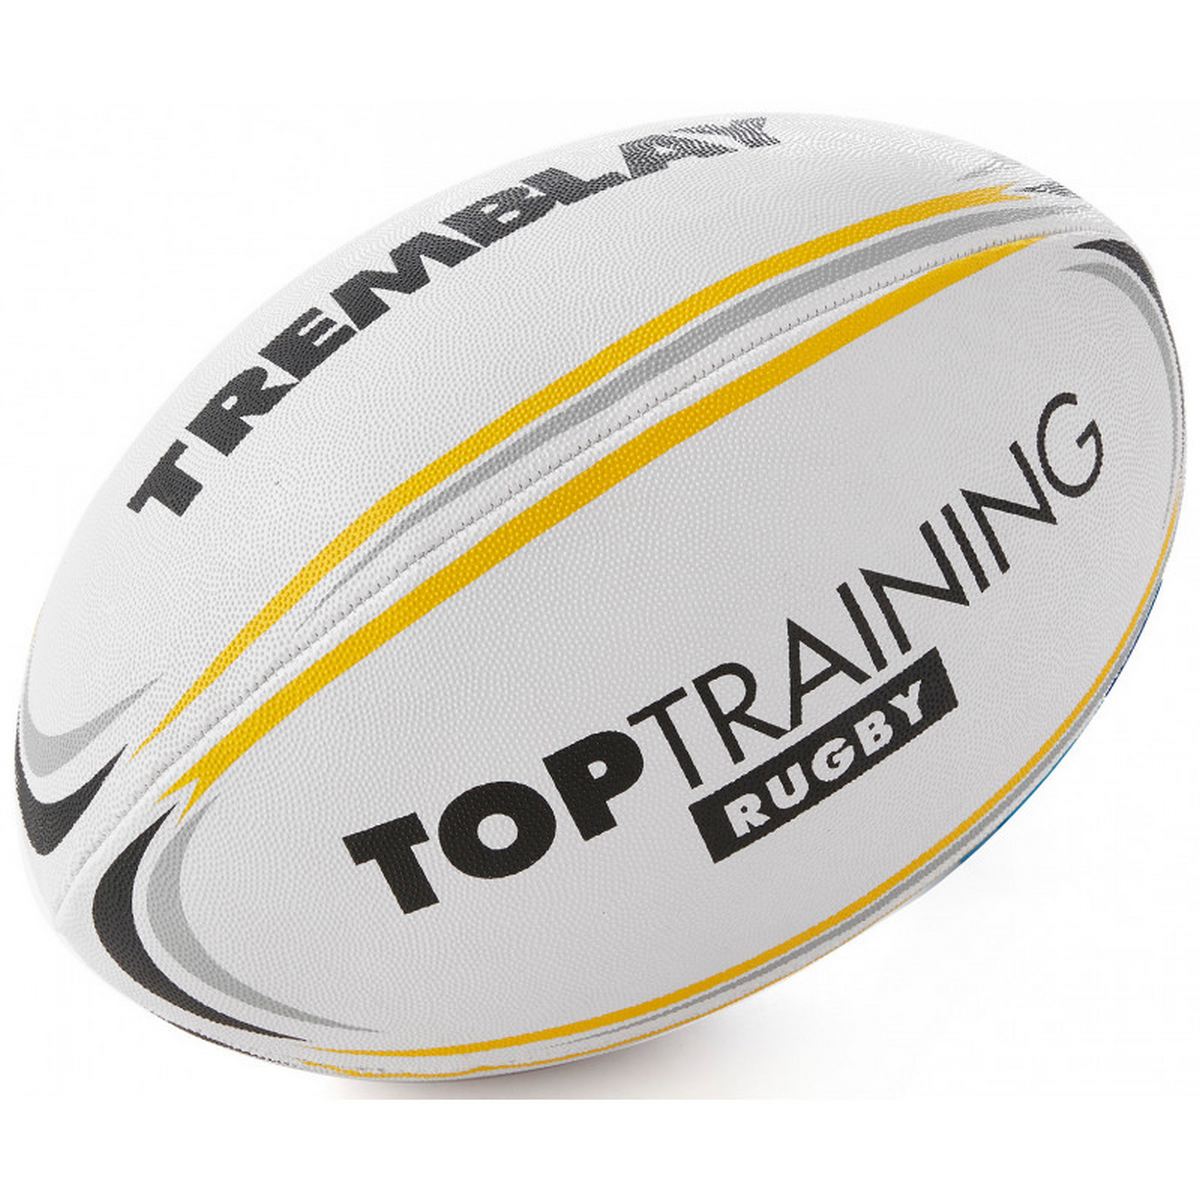 TREMBLAY_RCL3_ballon_de_rugby_TOP_TRAINING_taille-3_blanc-jaune_sgequipement_sg_equipement (2)